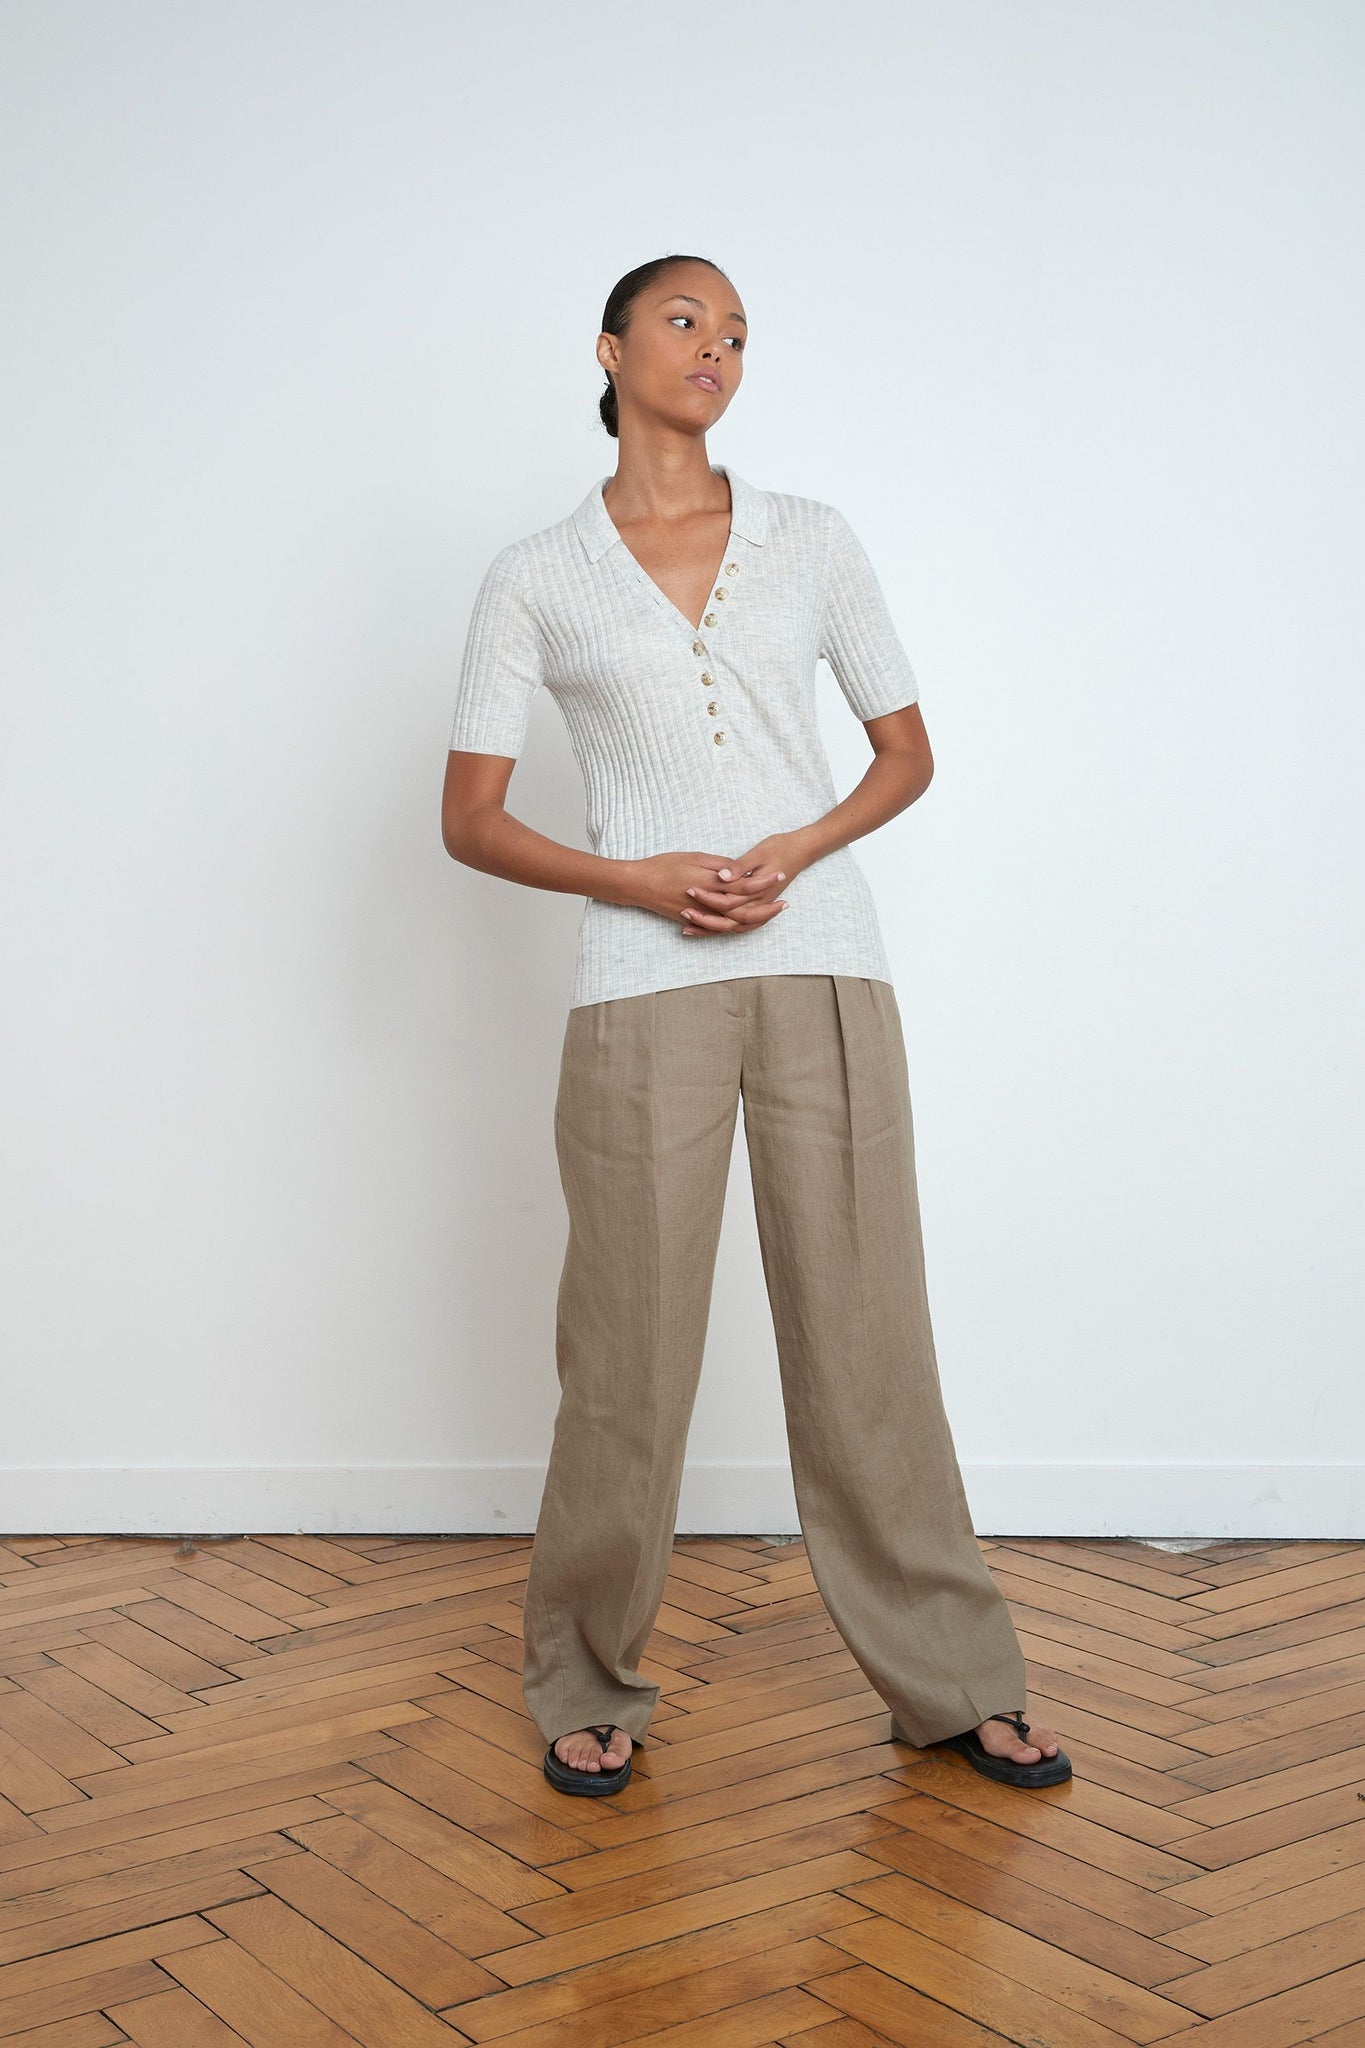 SOCOTRA POLO BY LOULOU STUDIO IN LIGHT GREY MELANGE